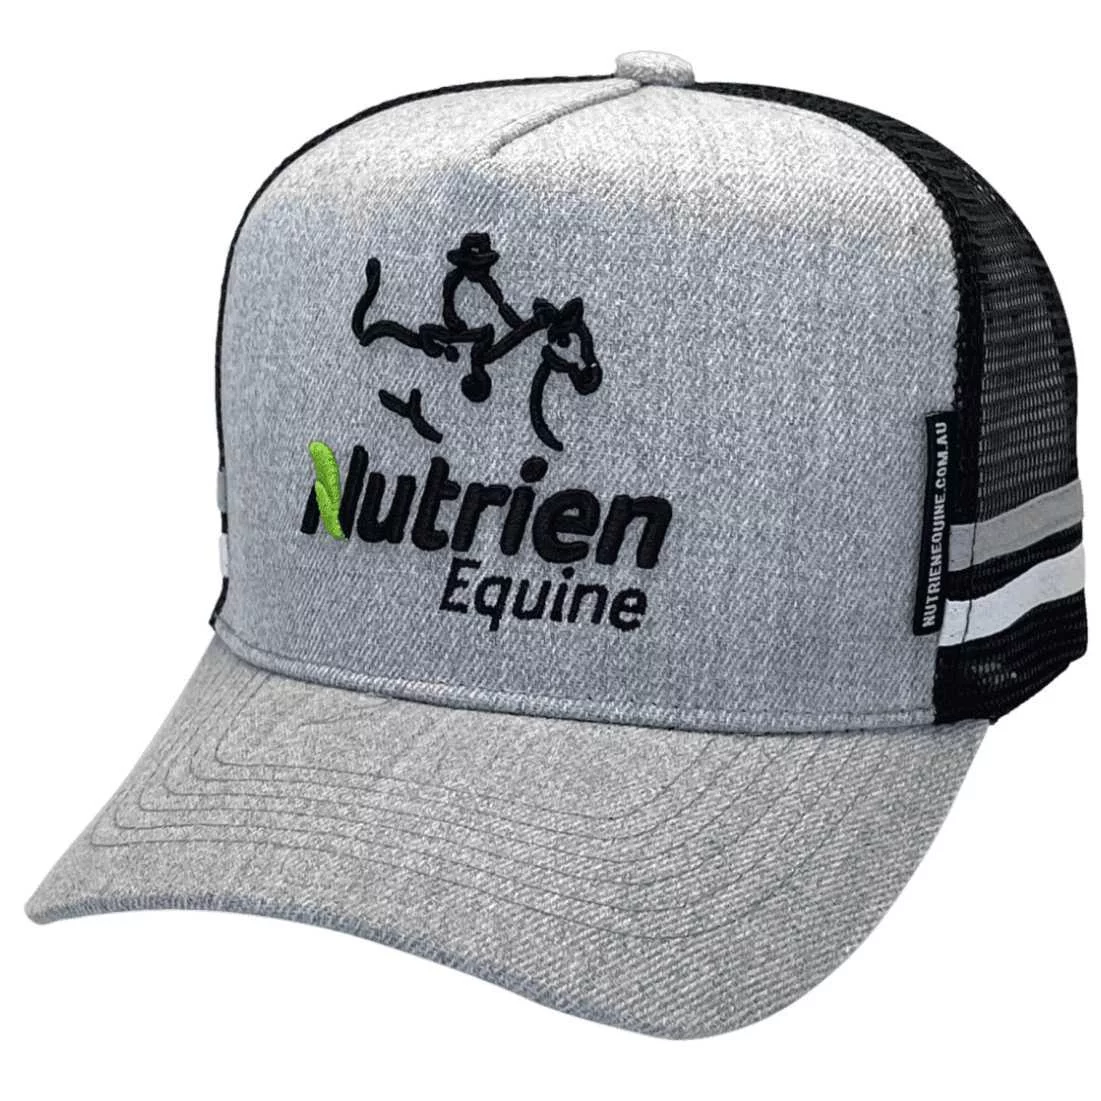 Nutrien Equine Tamworth NSW HP Midrange Aussie Trucker Hat with Australian Head Fit Crown Size and double Side Bands - Marle Grey Fleck Acrylic Fabric